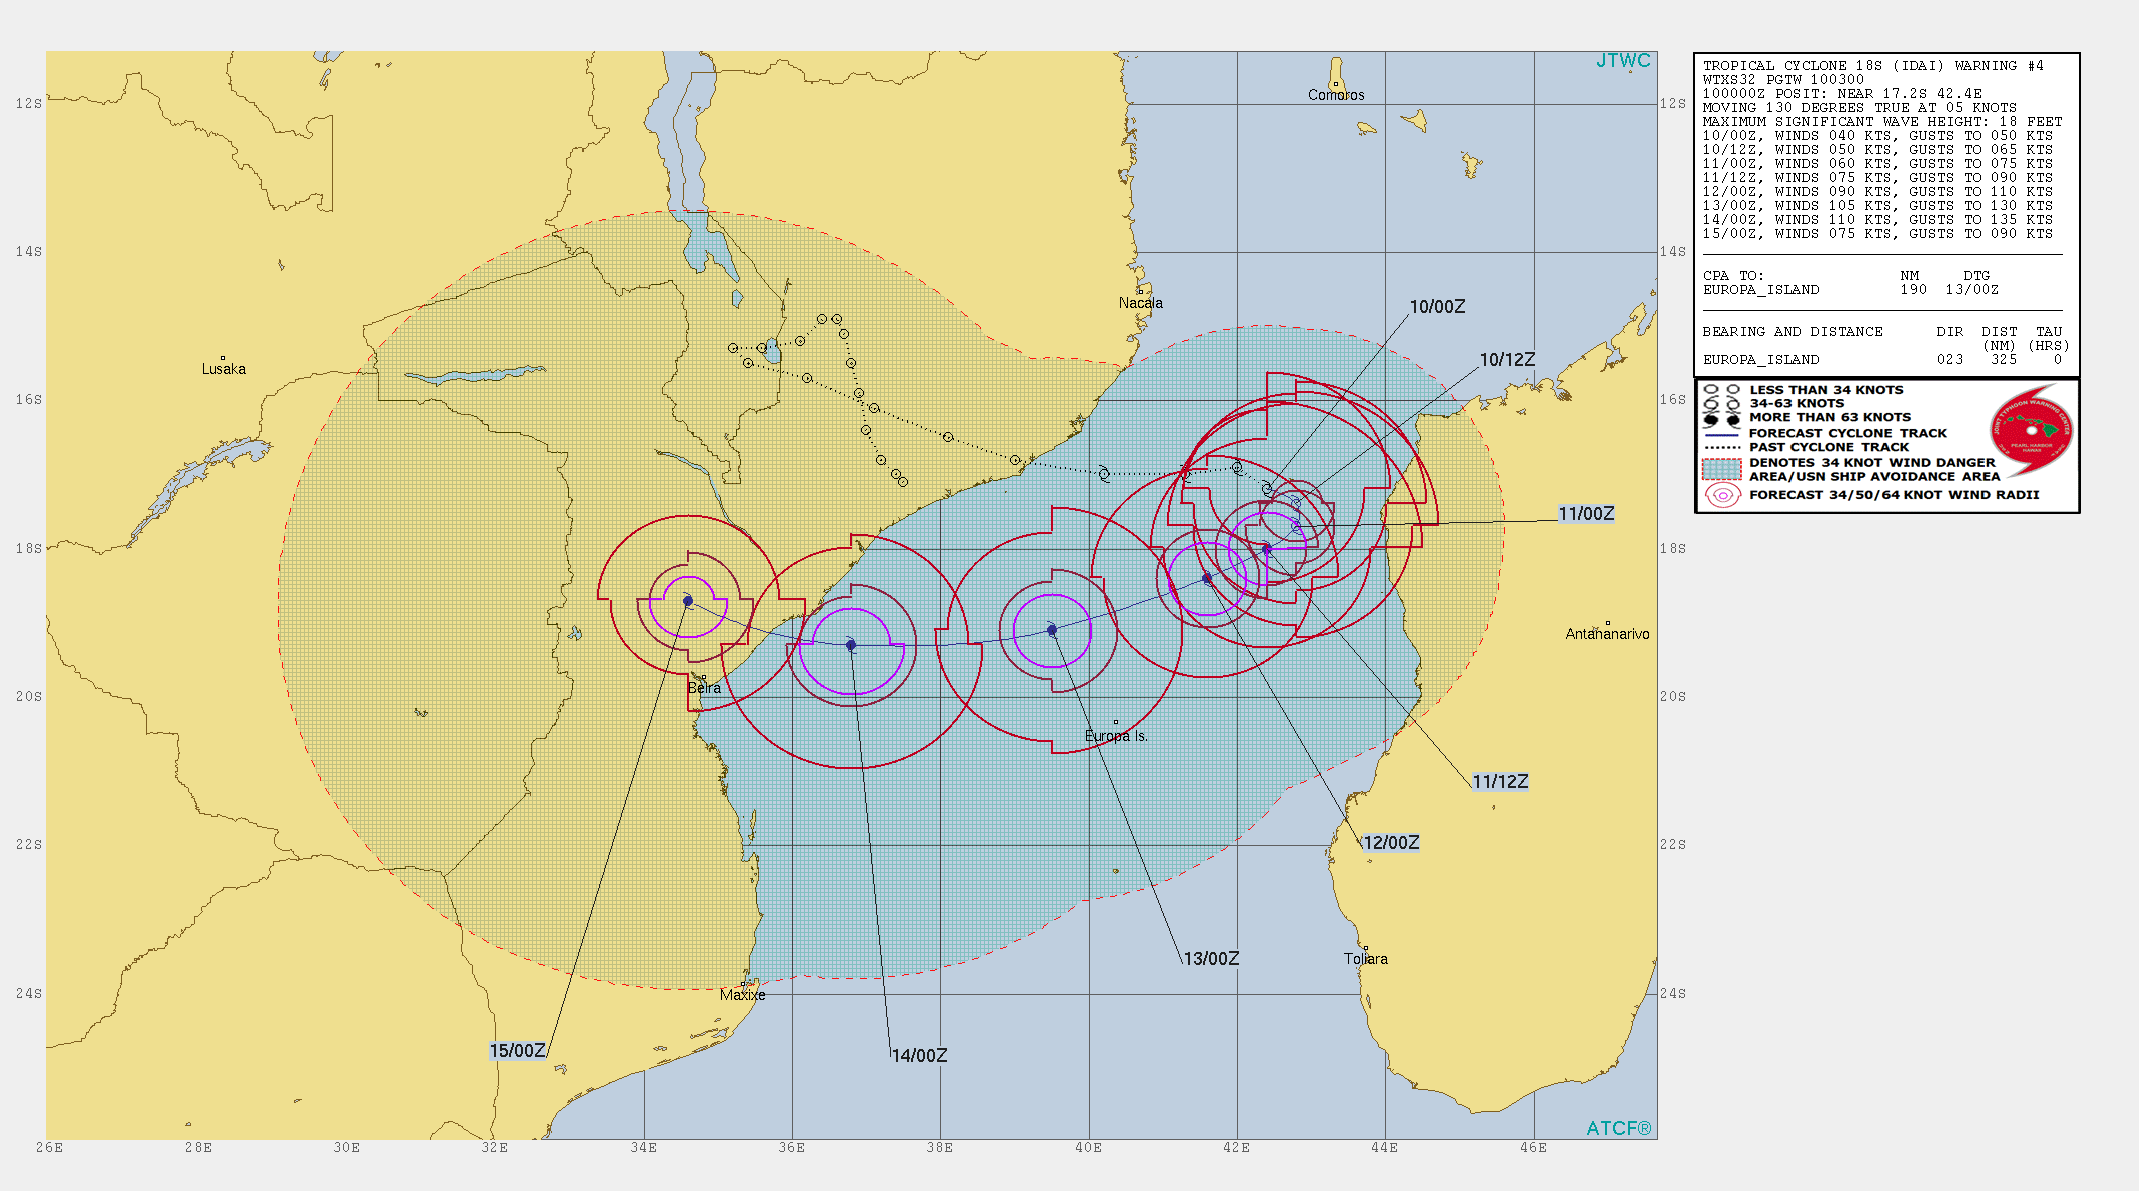 03UTC: IDAI(18S) is intensifying and could threaten the Beira region/Mozambique in 96hours as a powerful cyclone